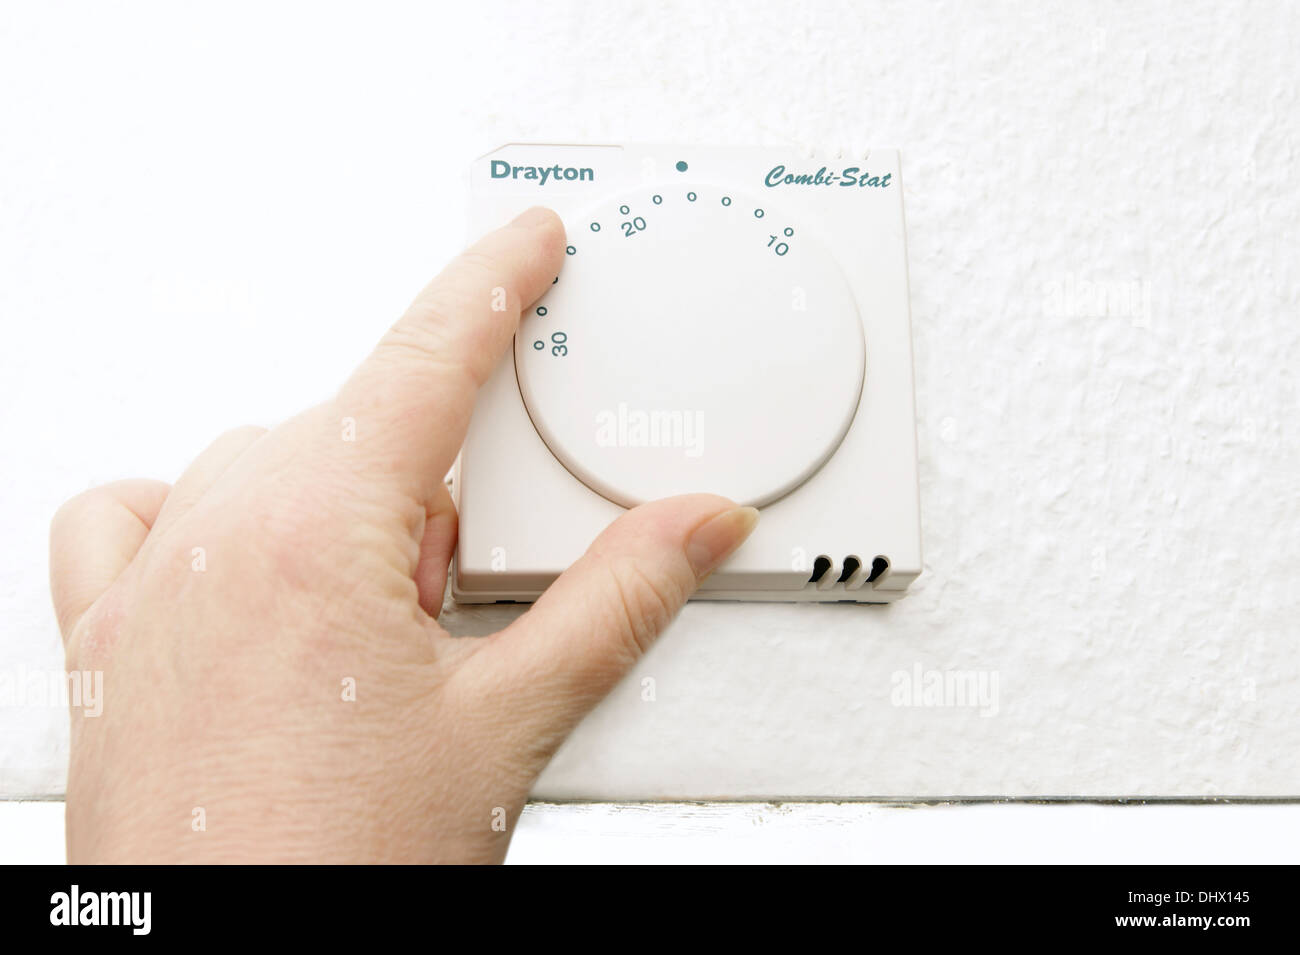 Energy efficiency - woman lowering the thermostat on the central heating control to combat global warming and climate change Stock Photo